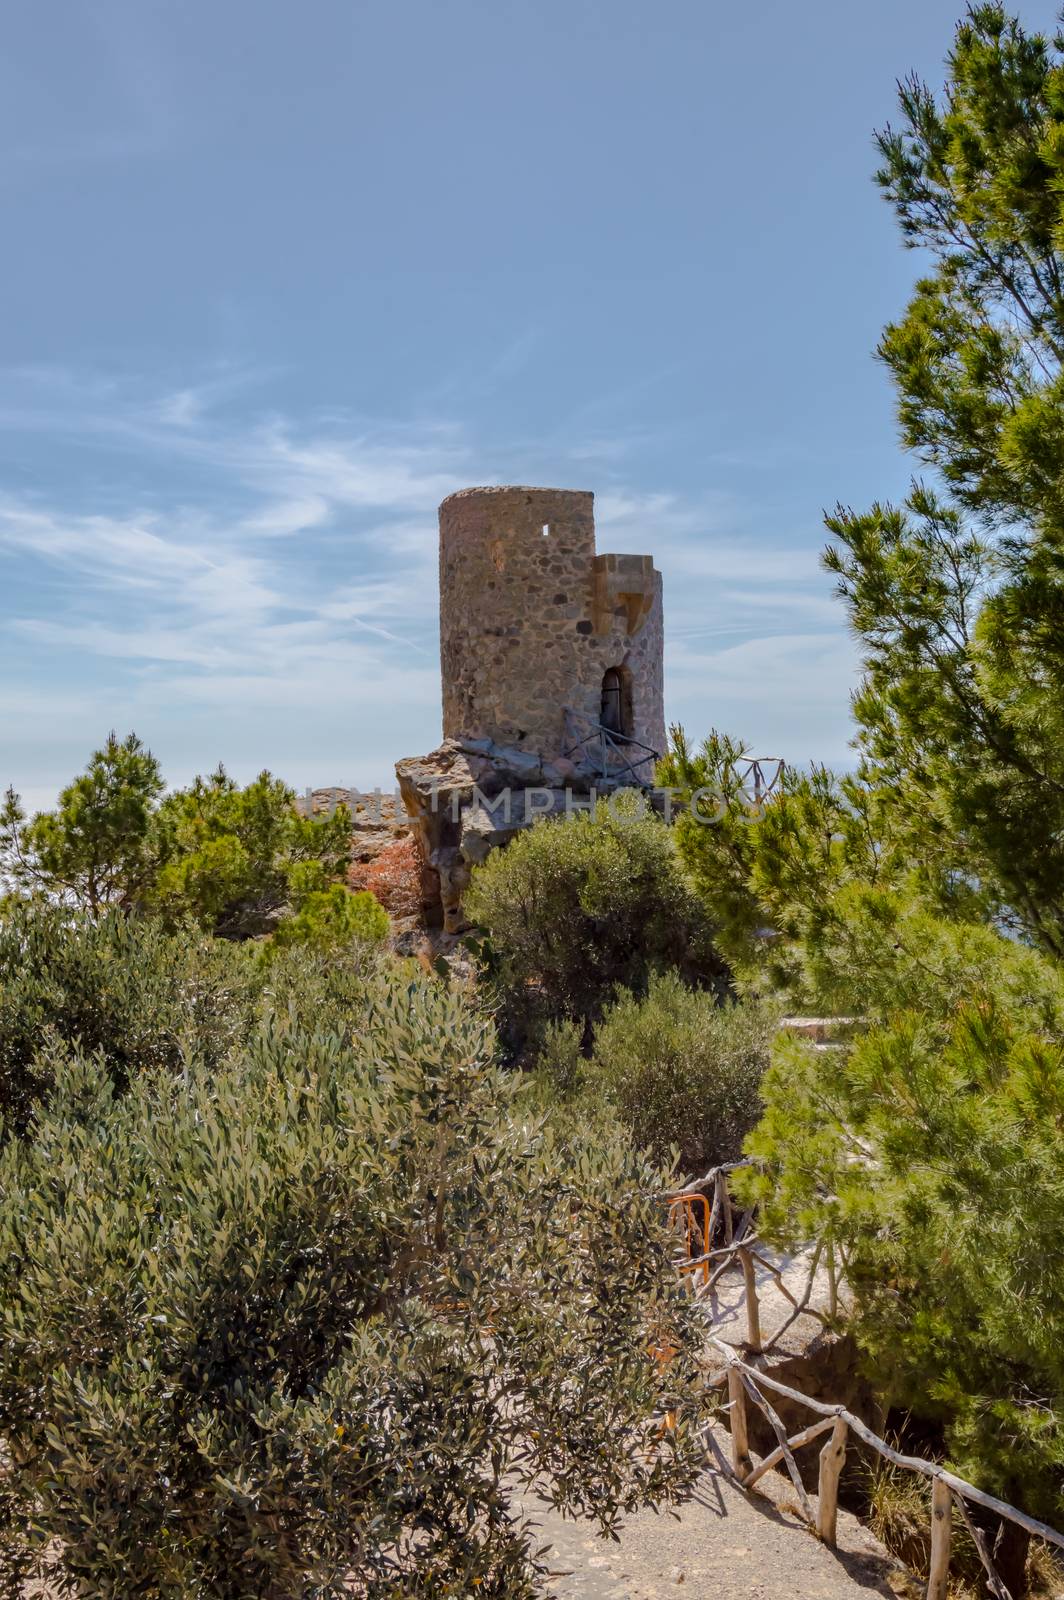 View of an old watchtower on the Mediterranean Sea  by Philou1000